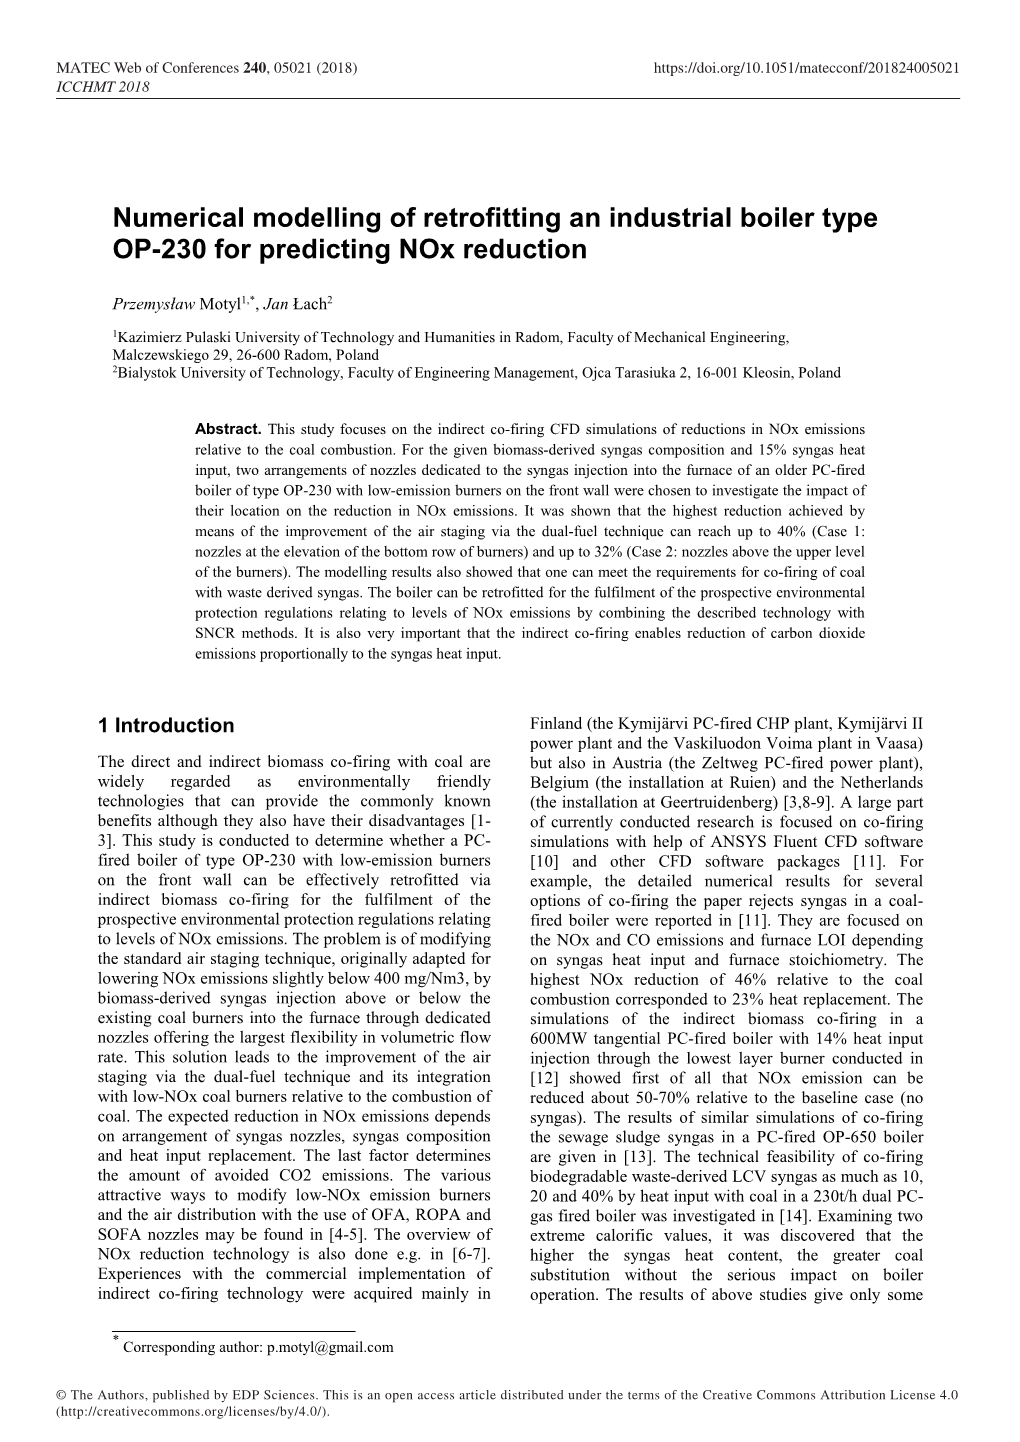 Numerical Modelling of Retrofitting an Industrial Boiler Type OP-230 for Predicting Nox Reduction